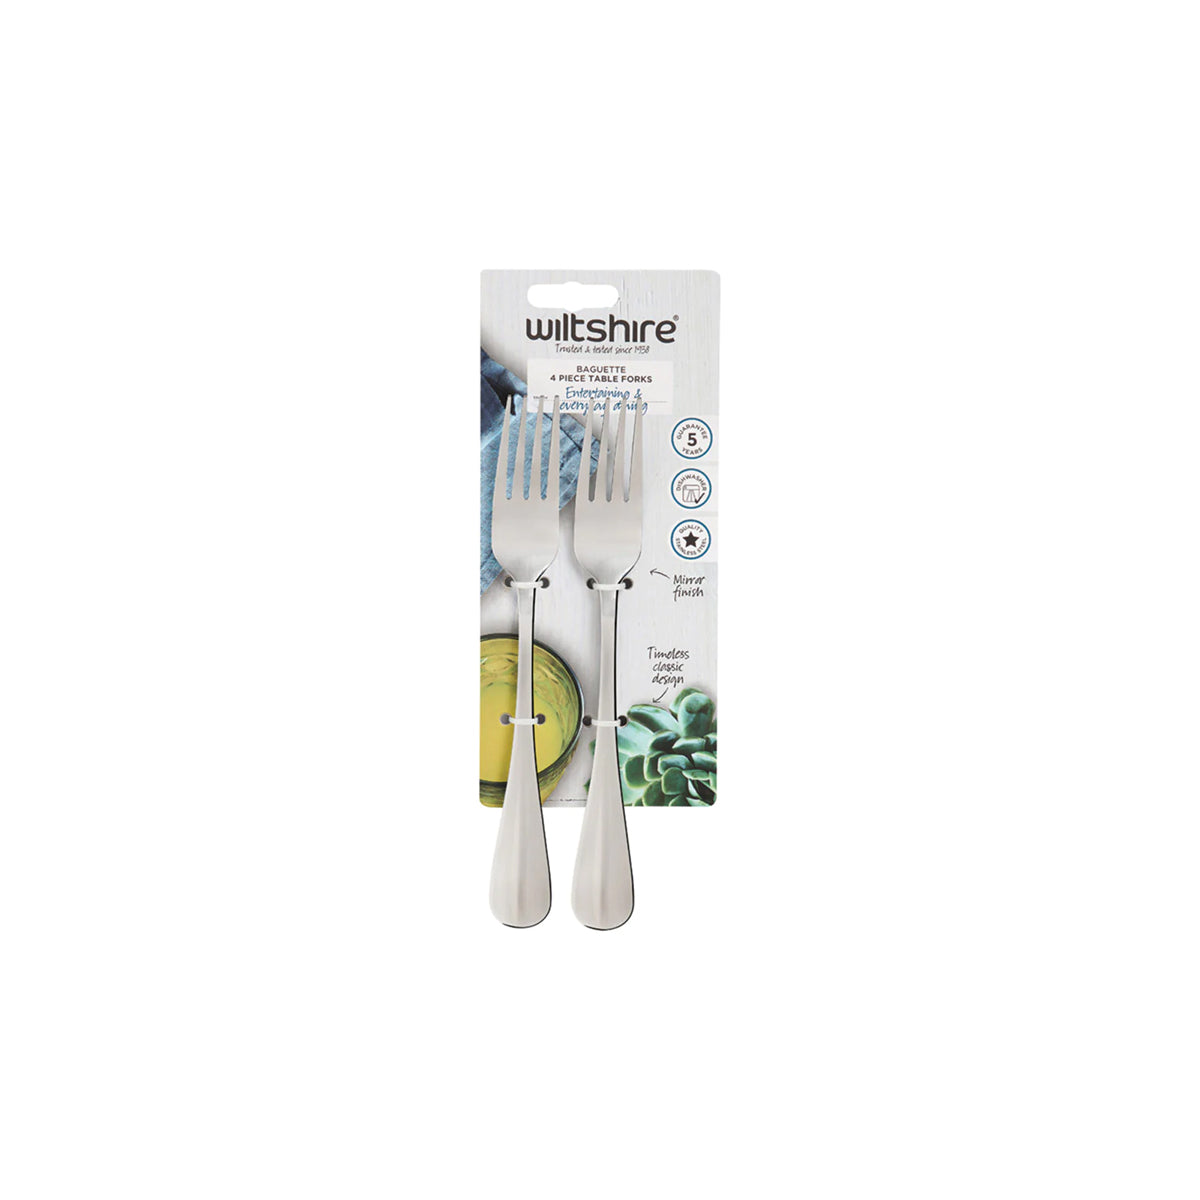 WLT50570 Wiltshire Baguette Table Fork 4pc Tomkin Australia Hospitality Supplies